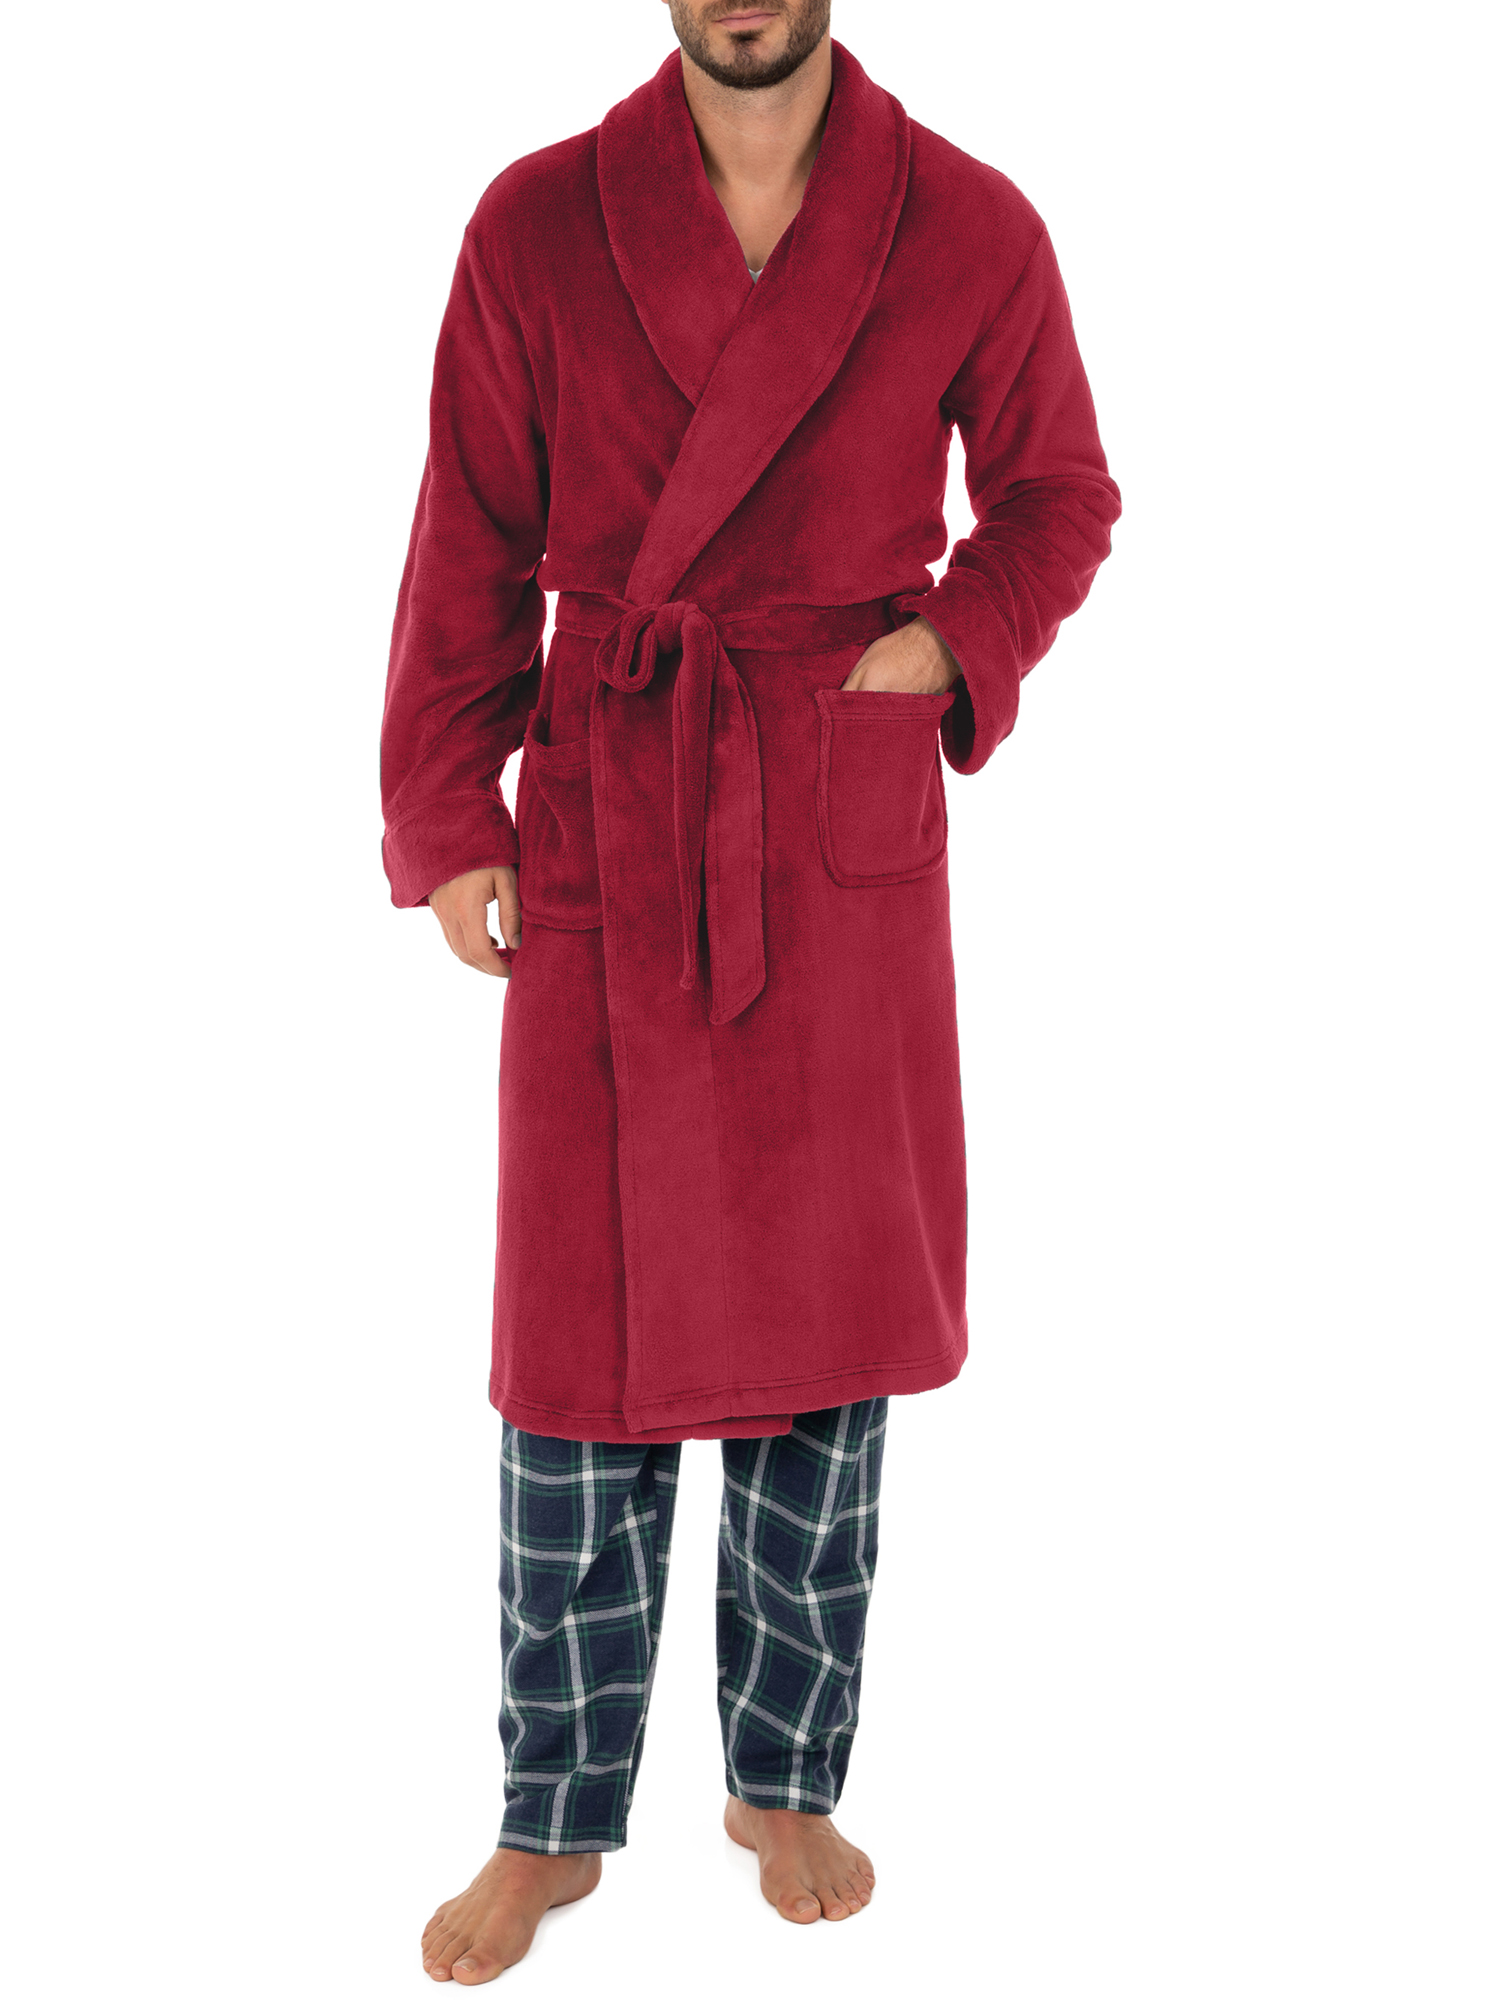 Fruit of the Loom Adult Mens Solid Plush Fleece Bathrobe One Size - image 1 of 4